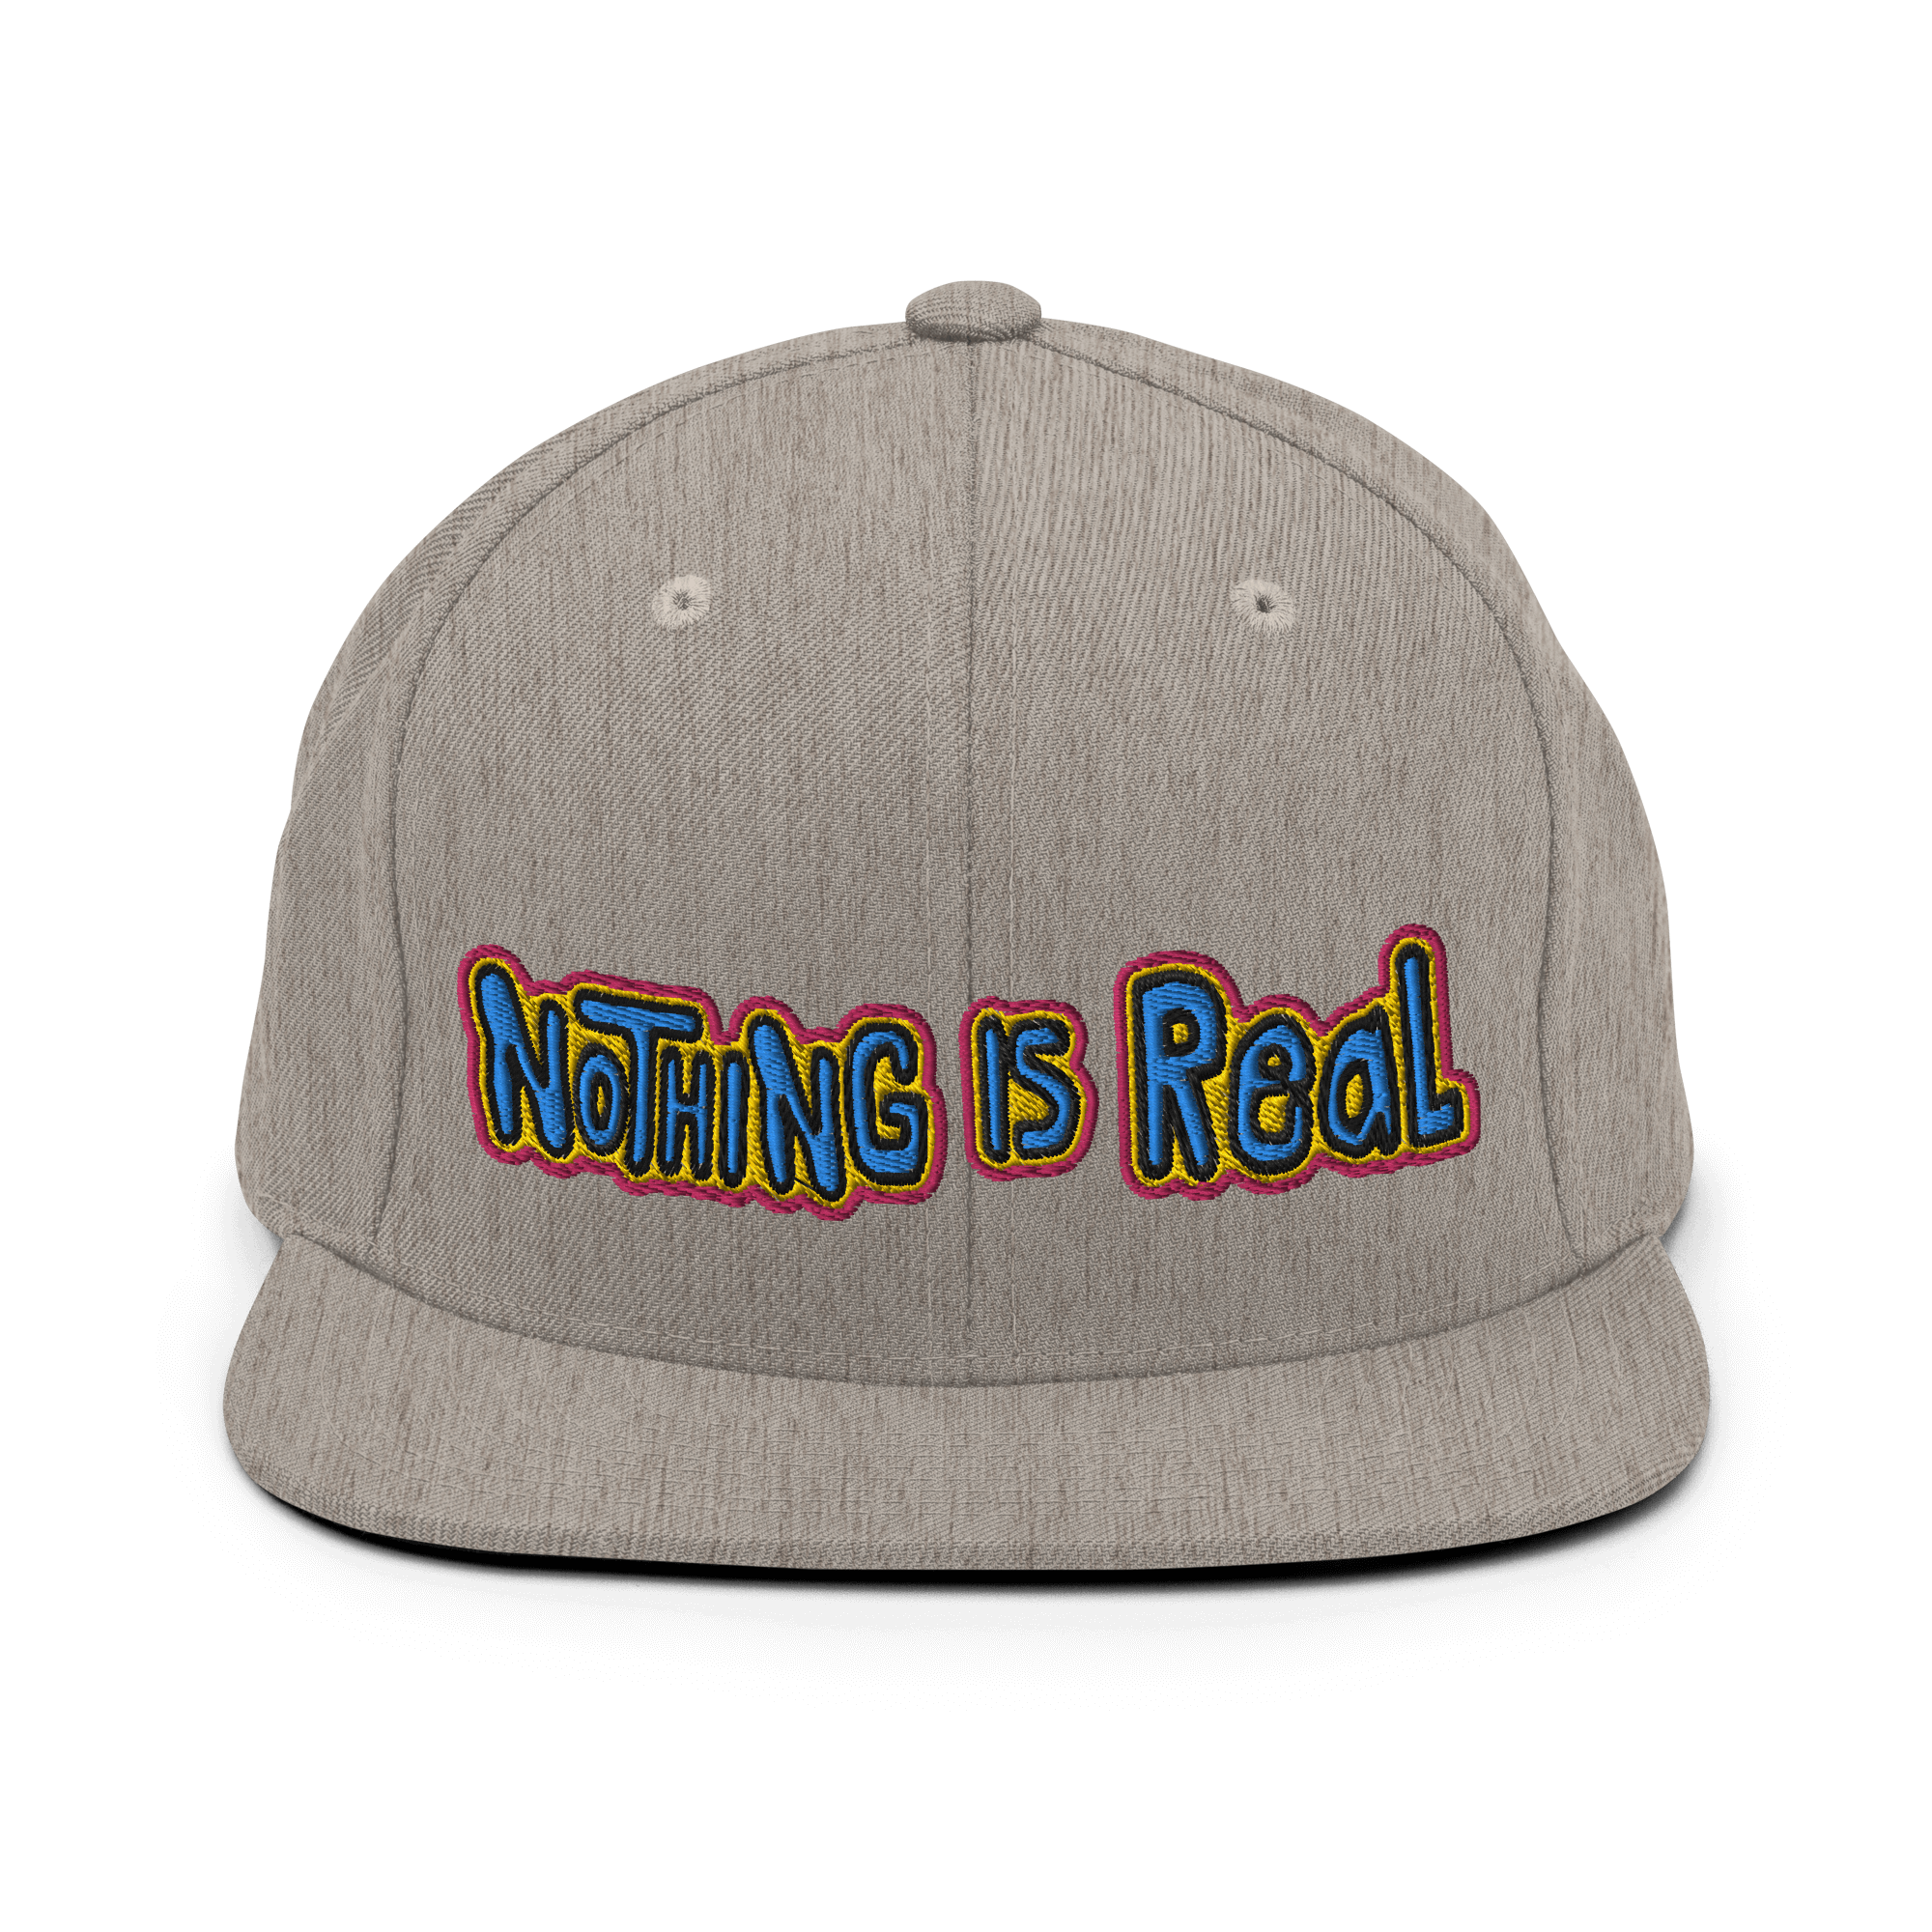 Nothing Is Real Snapback CapEmbrace the surreal with the 'Nothing Is Real' Snapback Cap – a classic fit, flat brim, and full buckram structure that defies convention. The adjustable snap closure ensures a comfortable, one-size-fits-most style. Crafted exc